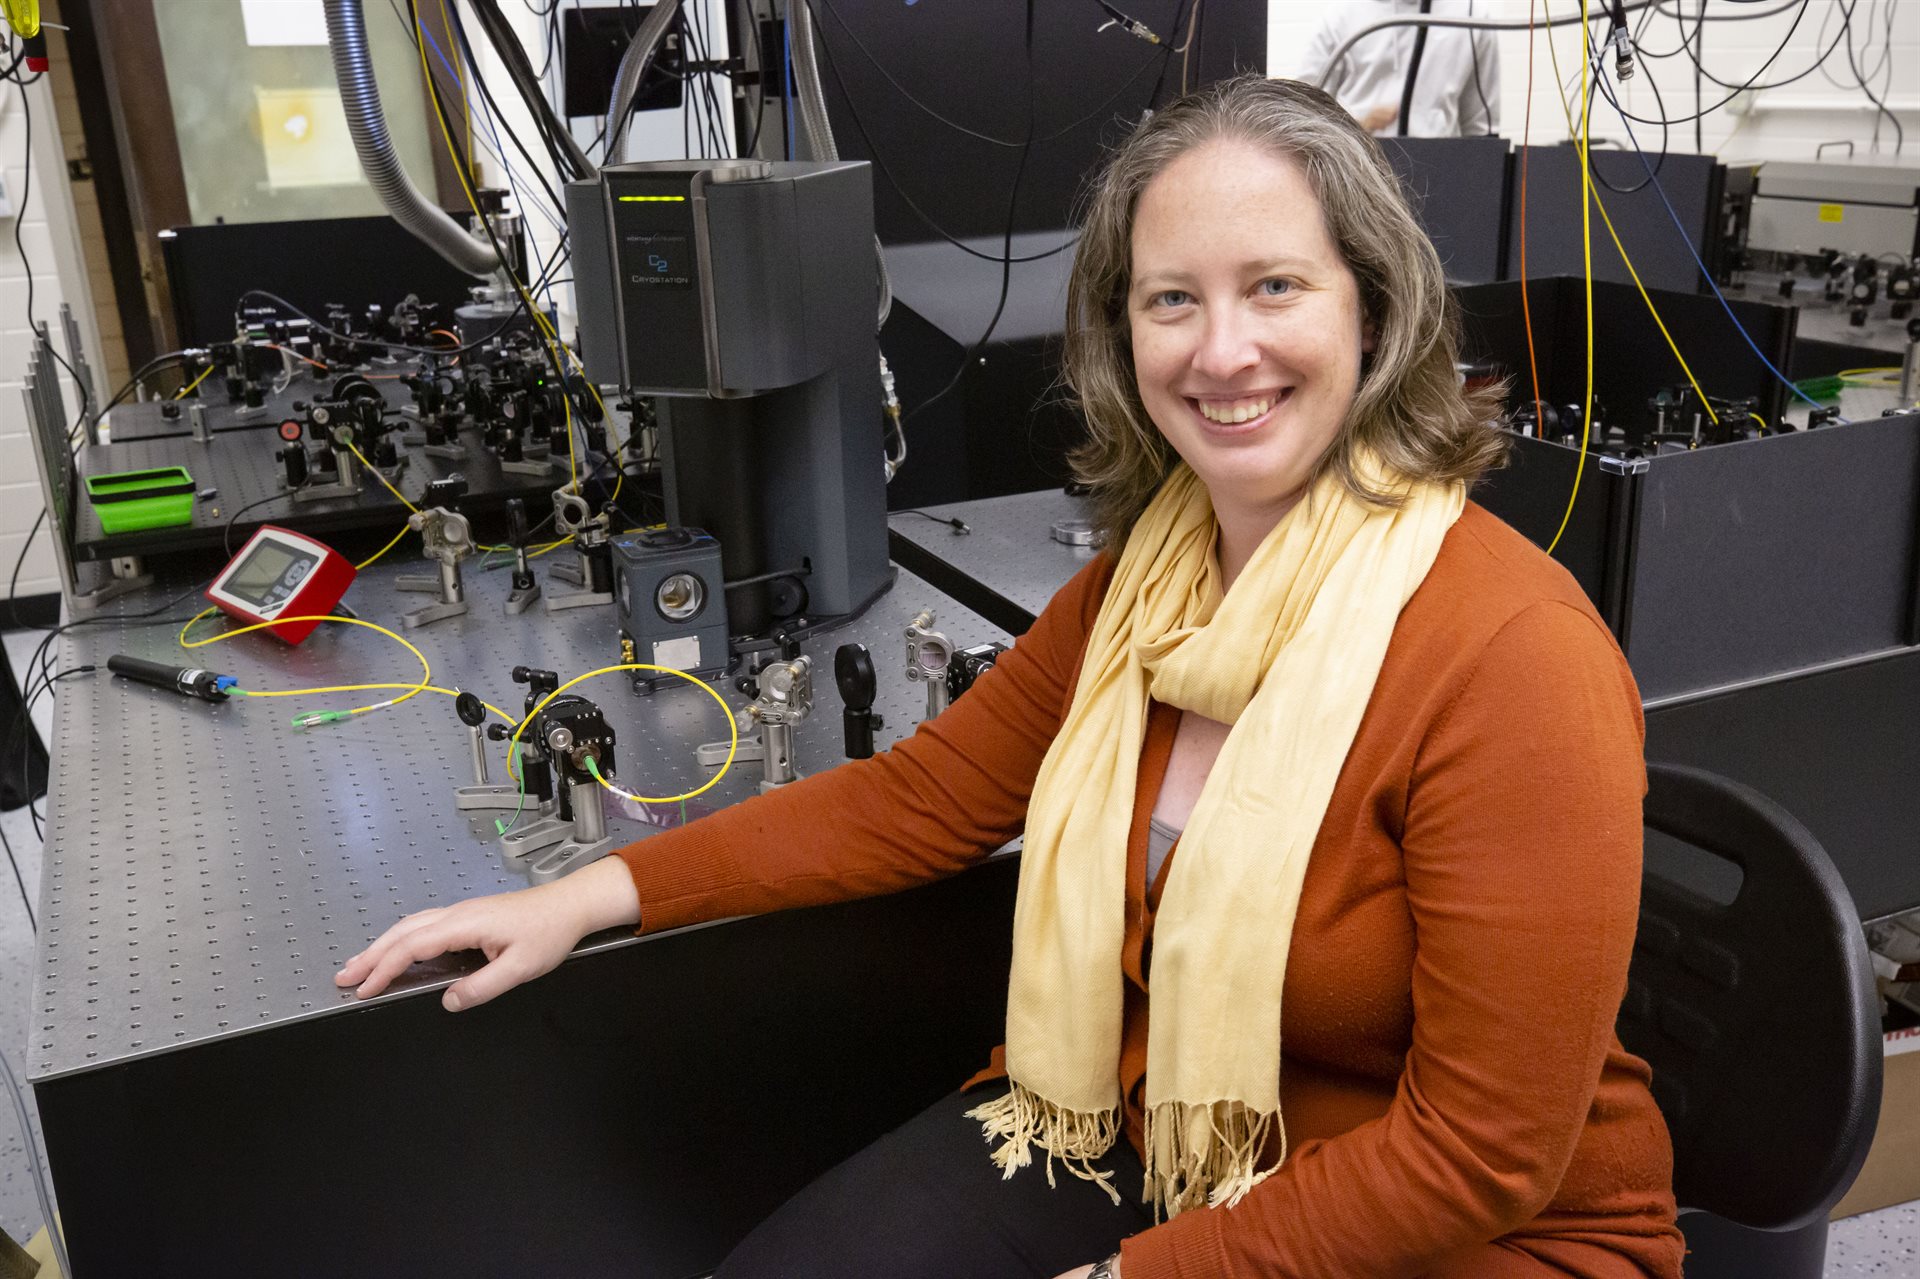 Illinois Physics Professor Elizabeth Goldschmidt is an experimentalist in quantum optics and quantum information. In her laboratory in the Materials Research Laboratory, her group investigates the generation, storage, characterization, and manipulation of photons for quantum information applications. Currently, her group is using rare-earth atom ensembles in innovative experiments having implications for the development of solid-state quantum memory. Photo by Michelle Hassel, University of Illinois Urbana-Champaign